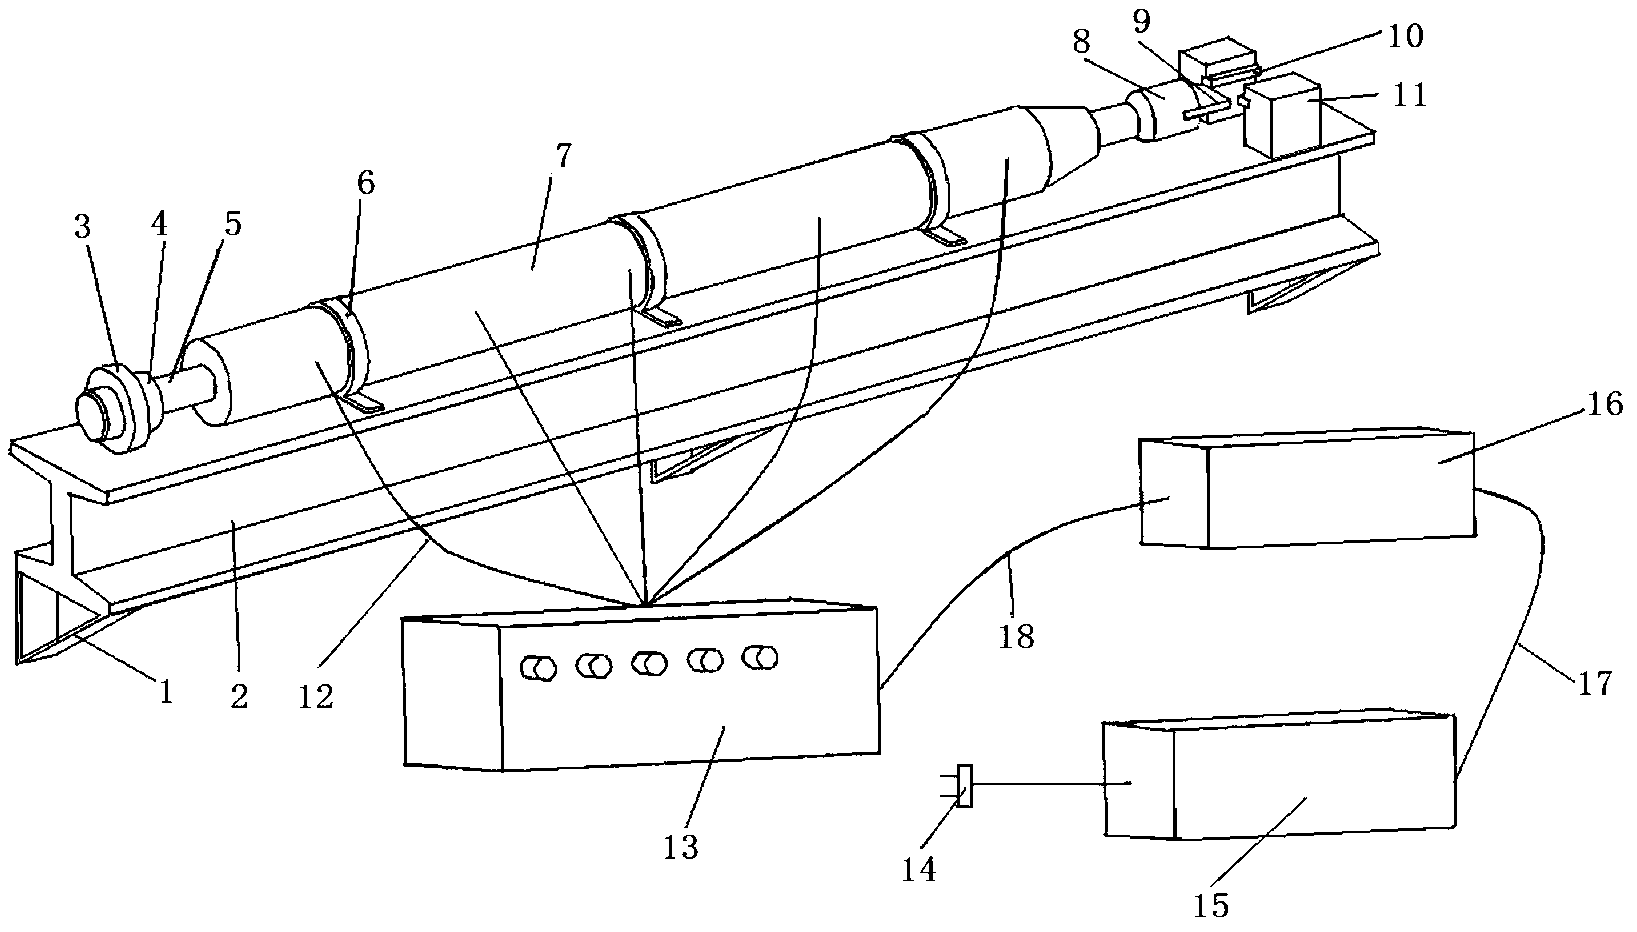 Electromagnetically driven high-speed cutting simulation experimental device